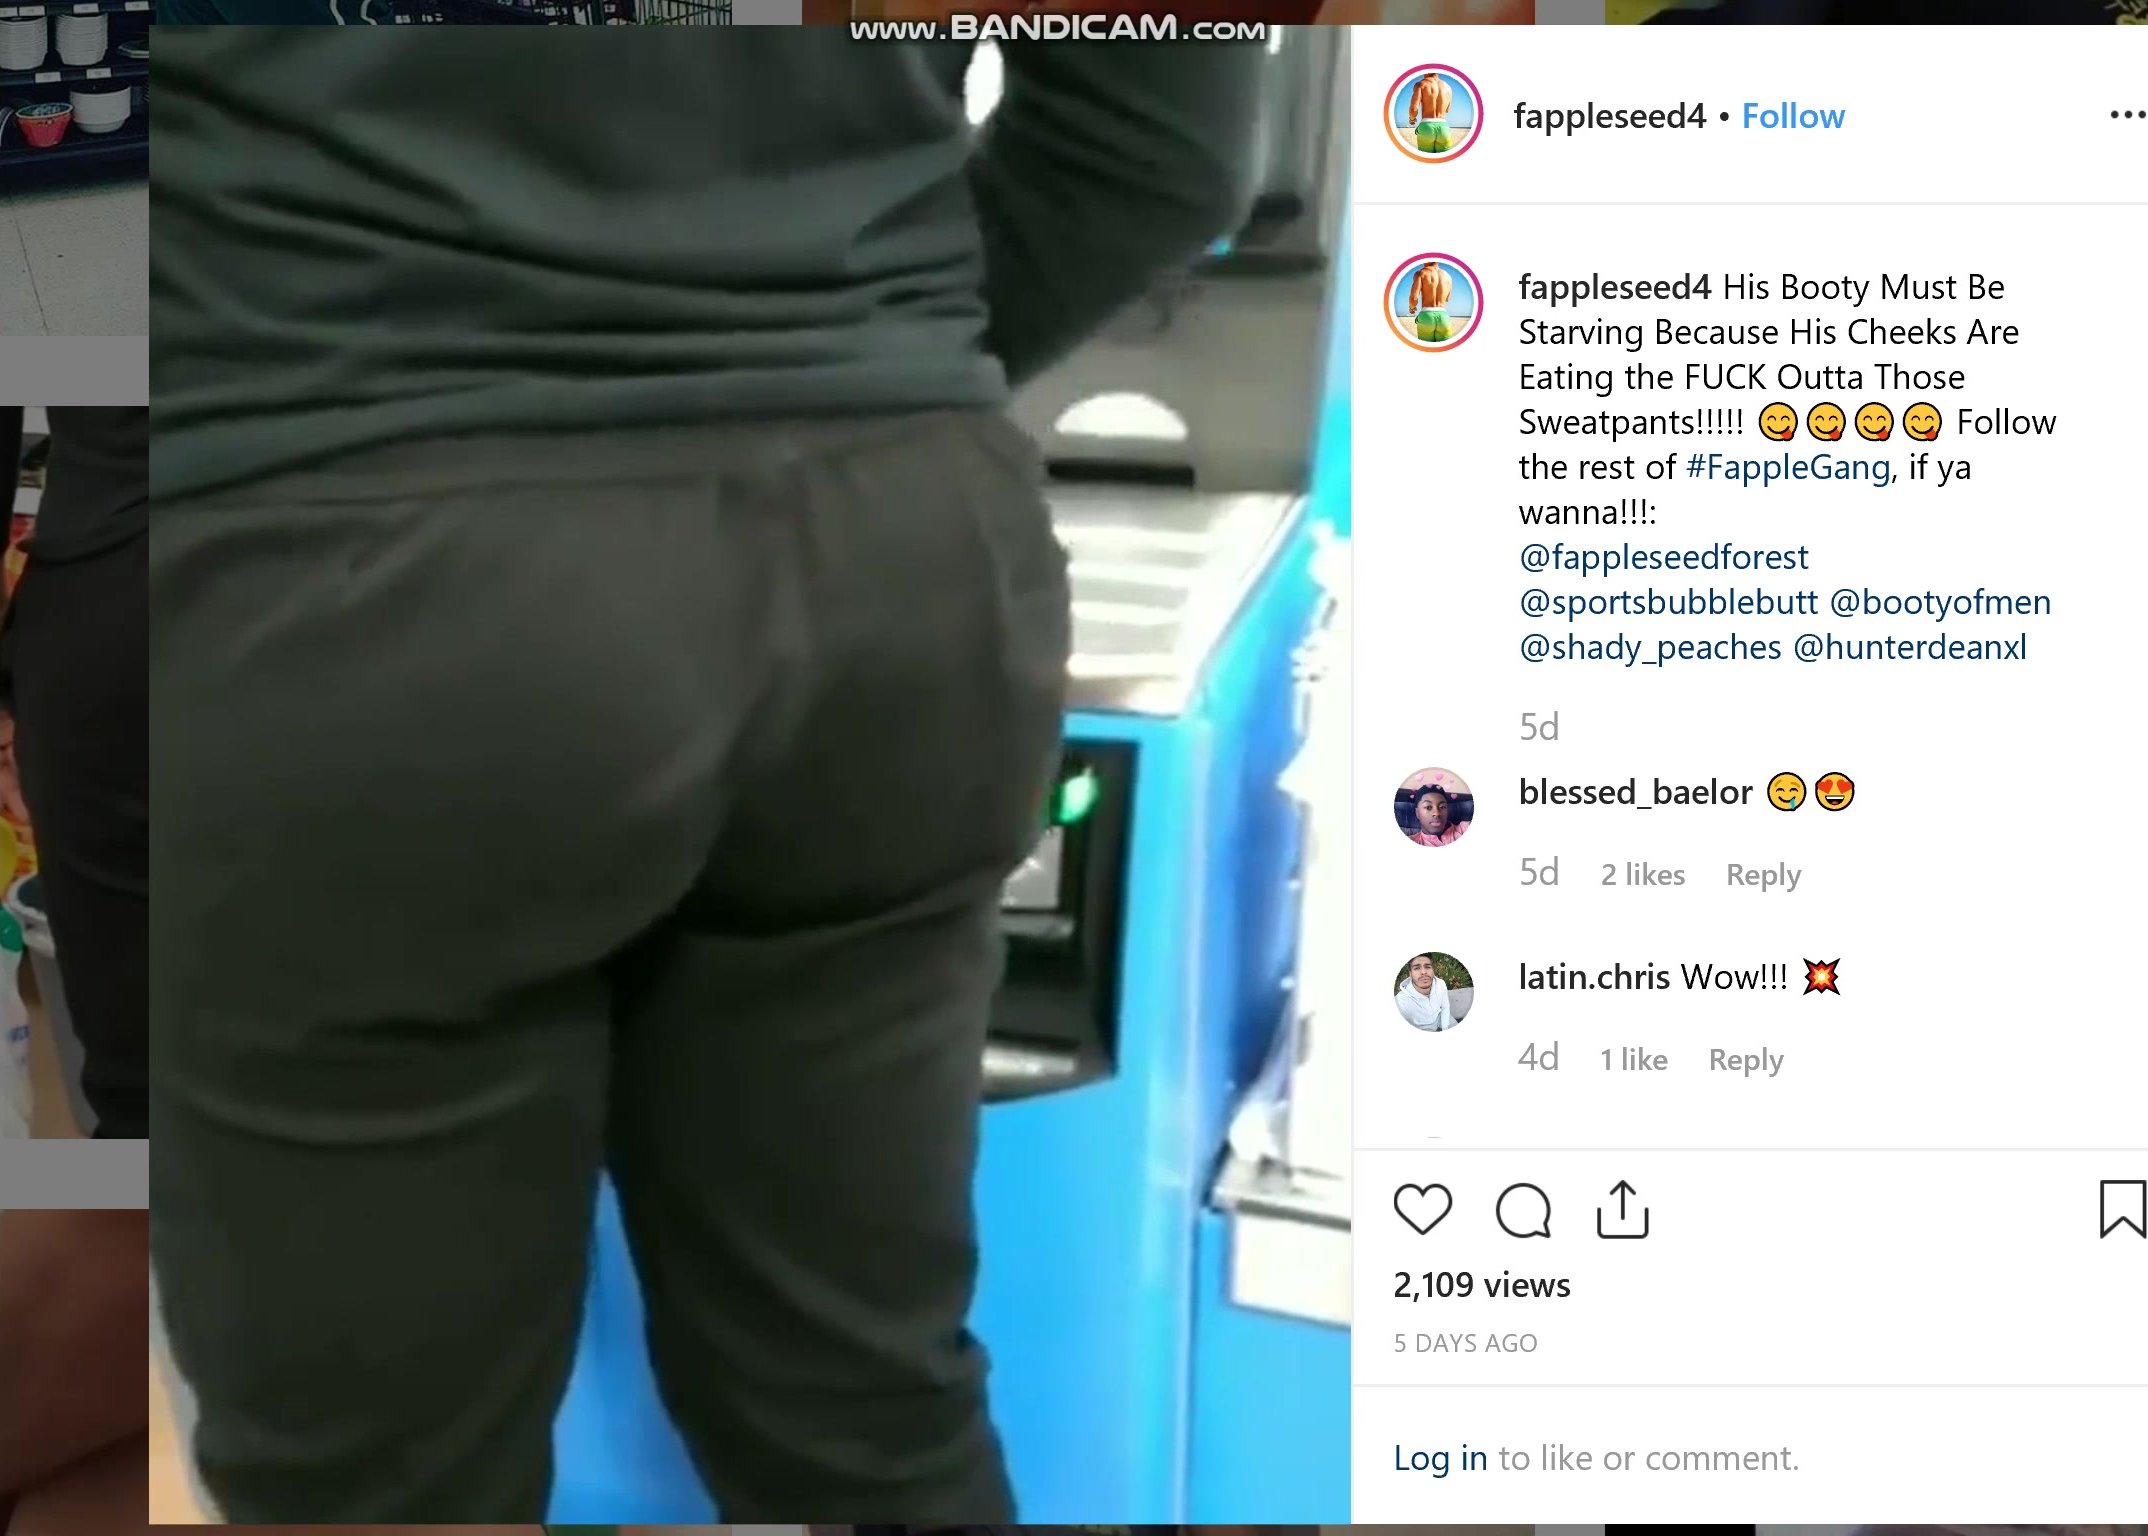 Thick butt dude at the self-checkout line